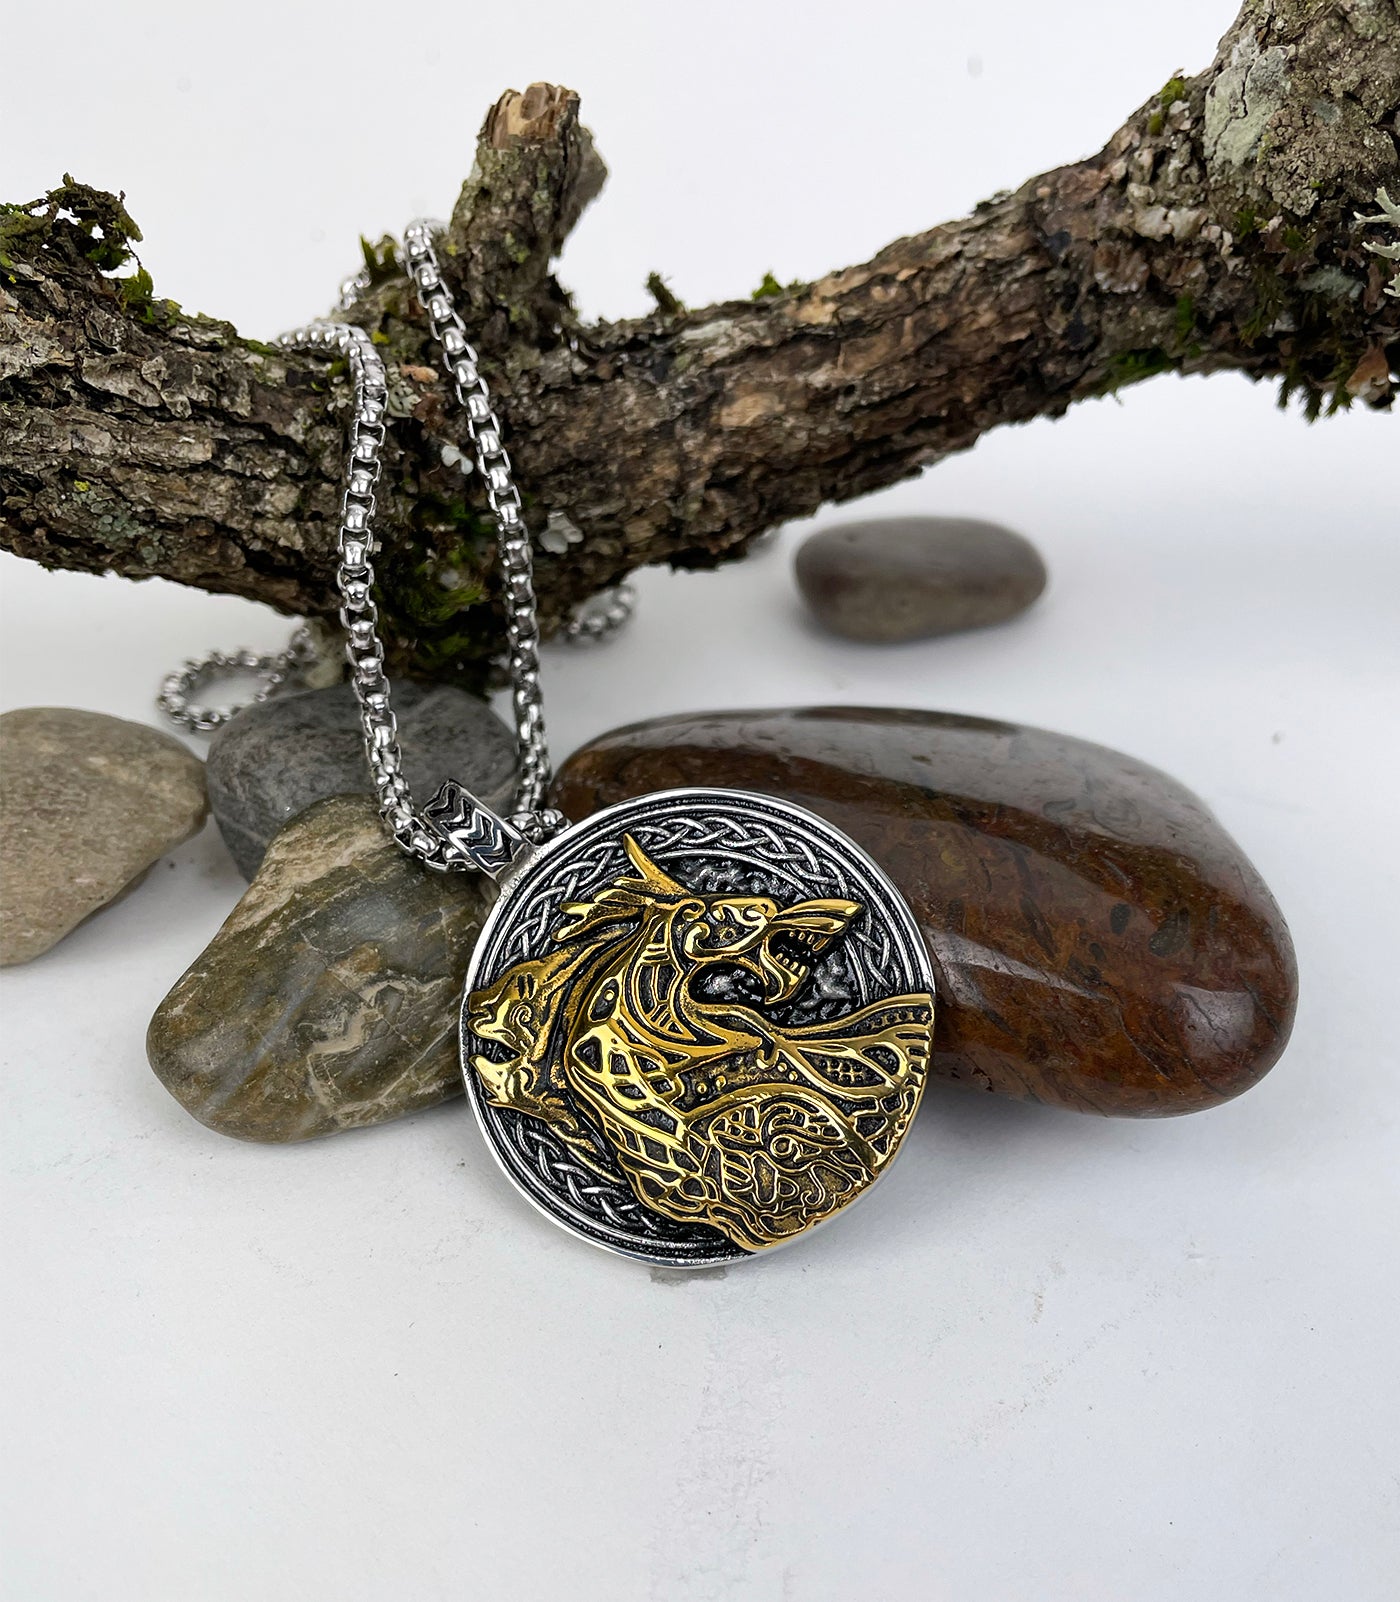 Three Mythical Creatures Stainless Steel Pendant